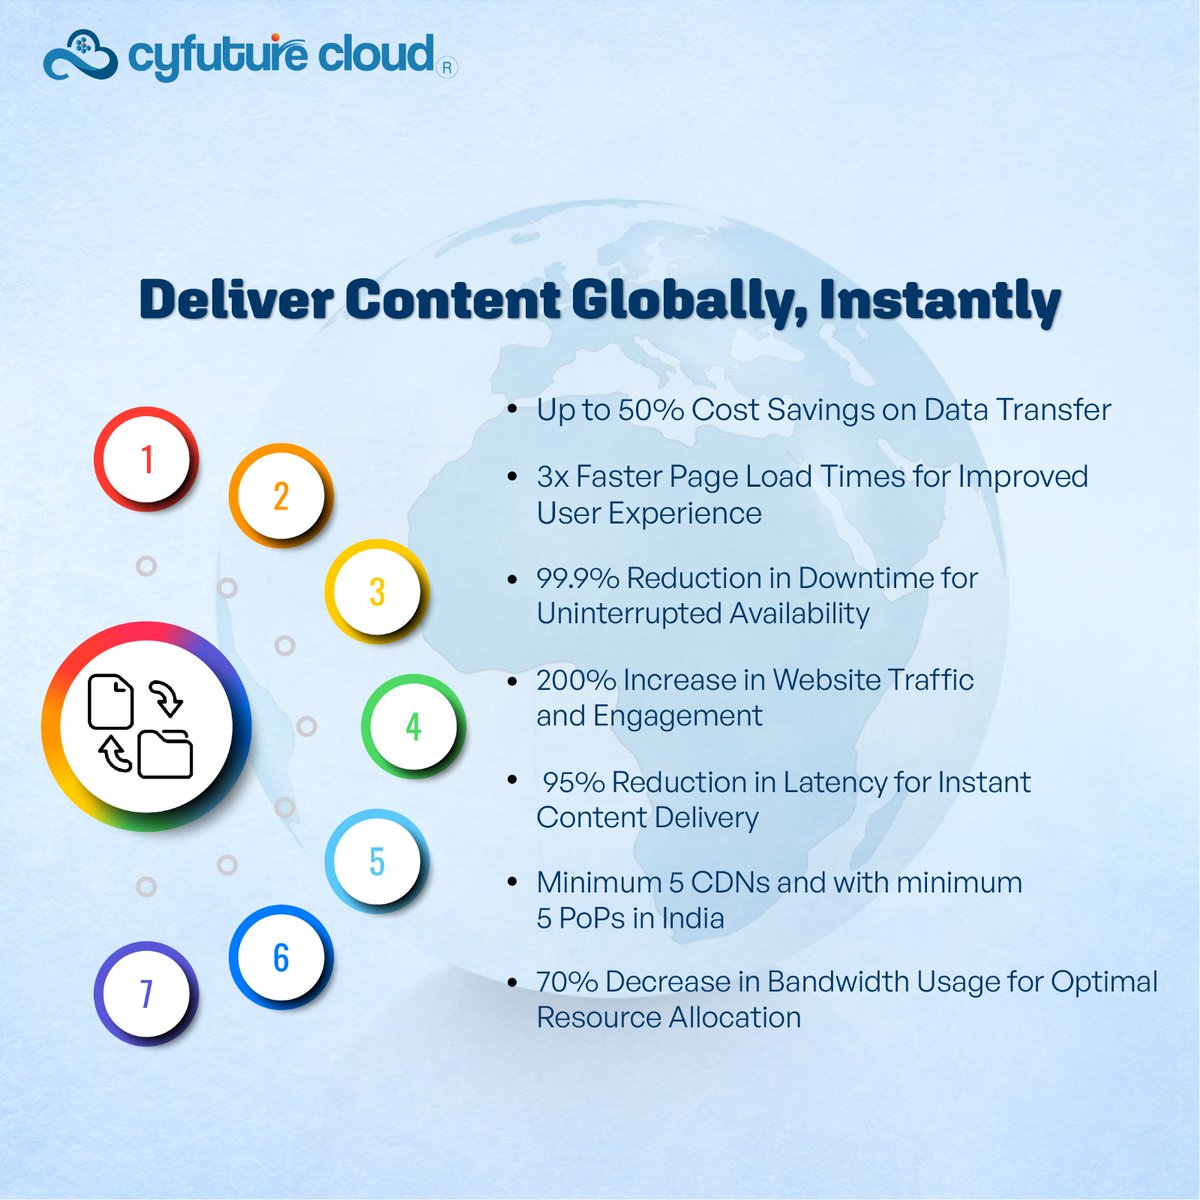 Introducing Cyfuture Cloud CDN Services! Deliver content globally, instantly with up to 50% cost savings on data transfer. Partner with us to elevate your online presence today!
#cloudhosting #cloudhostingsolution #cloud #cloudhosting #datacenter #marketing #dedicatedserver